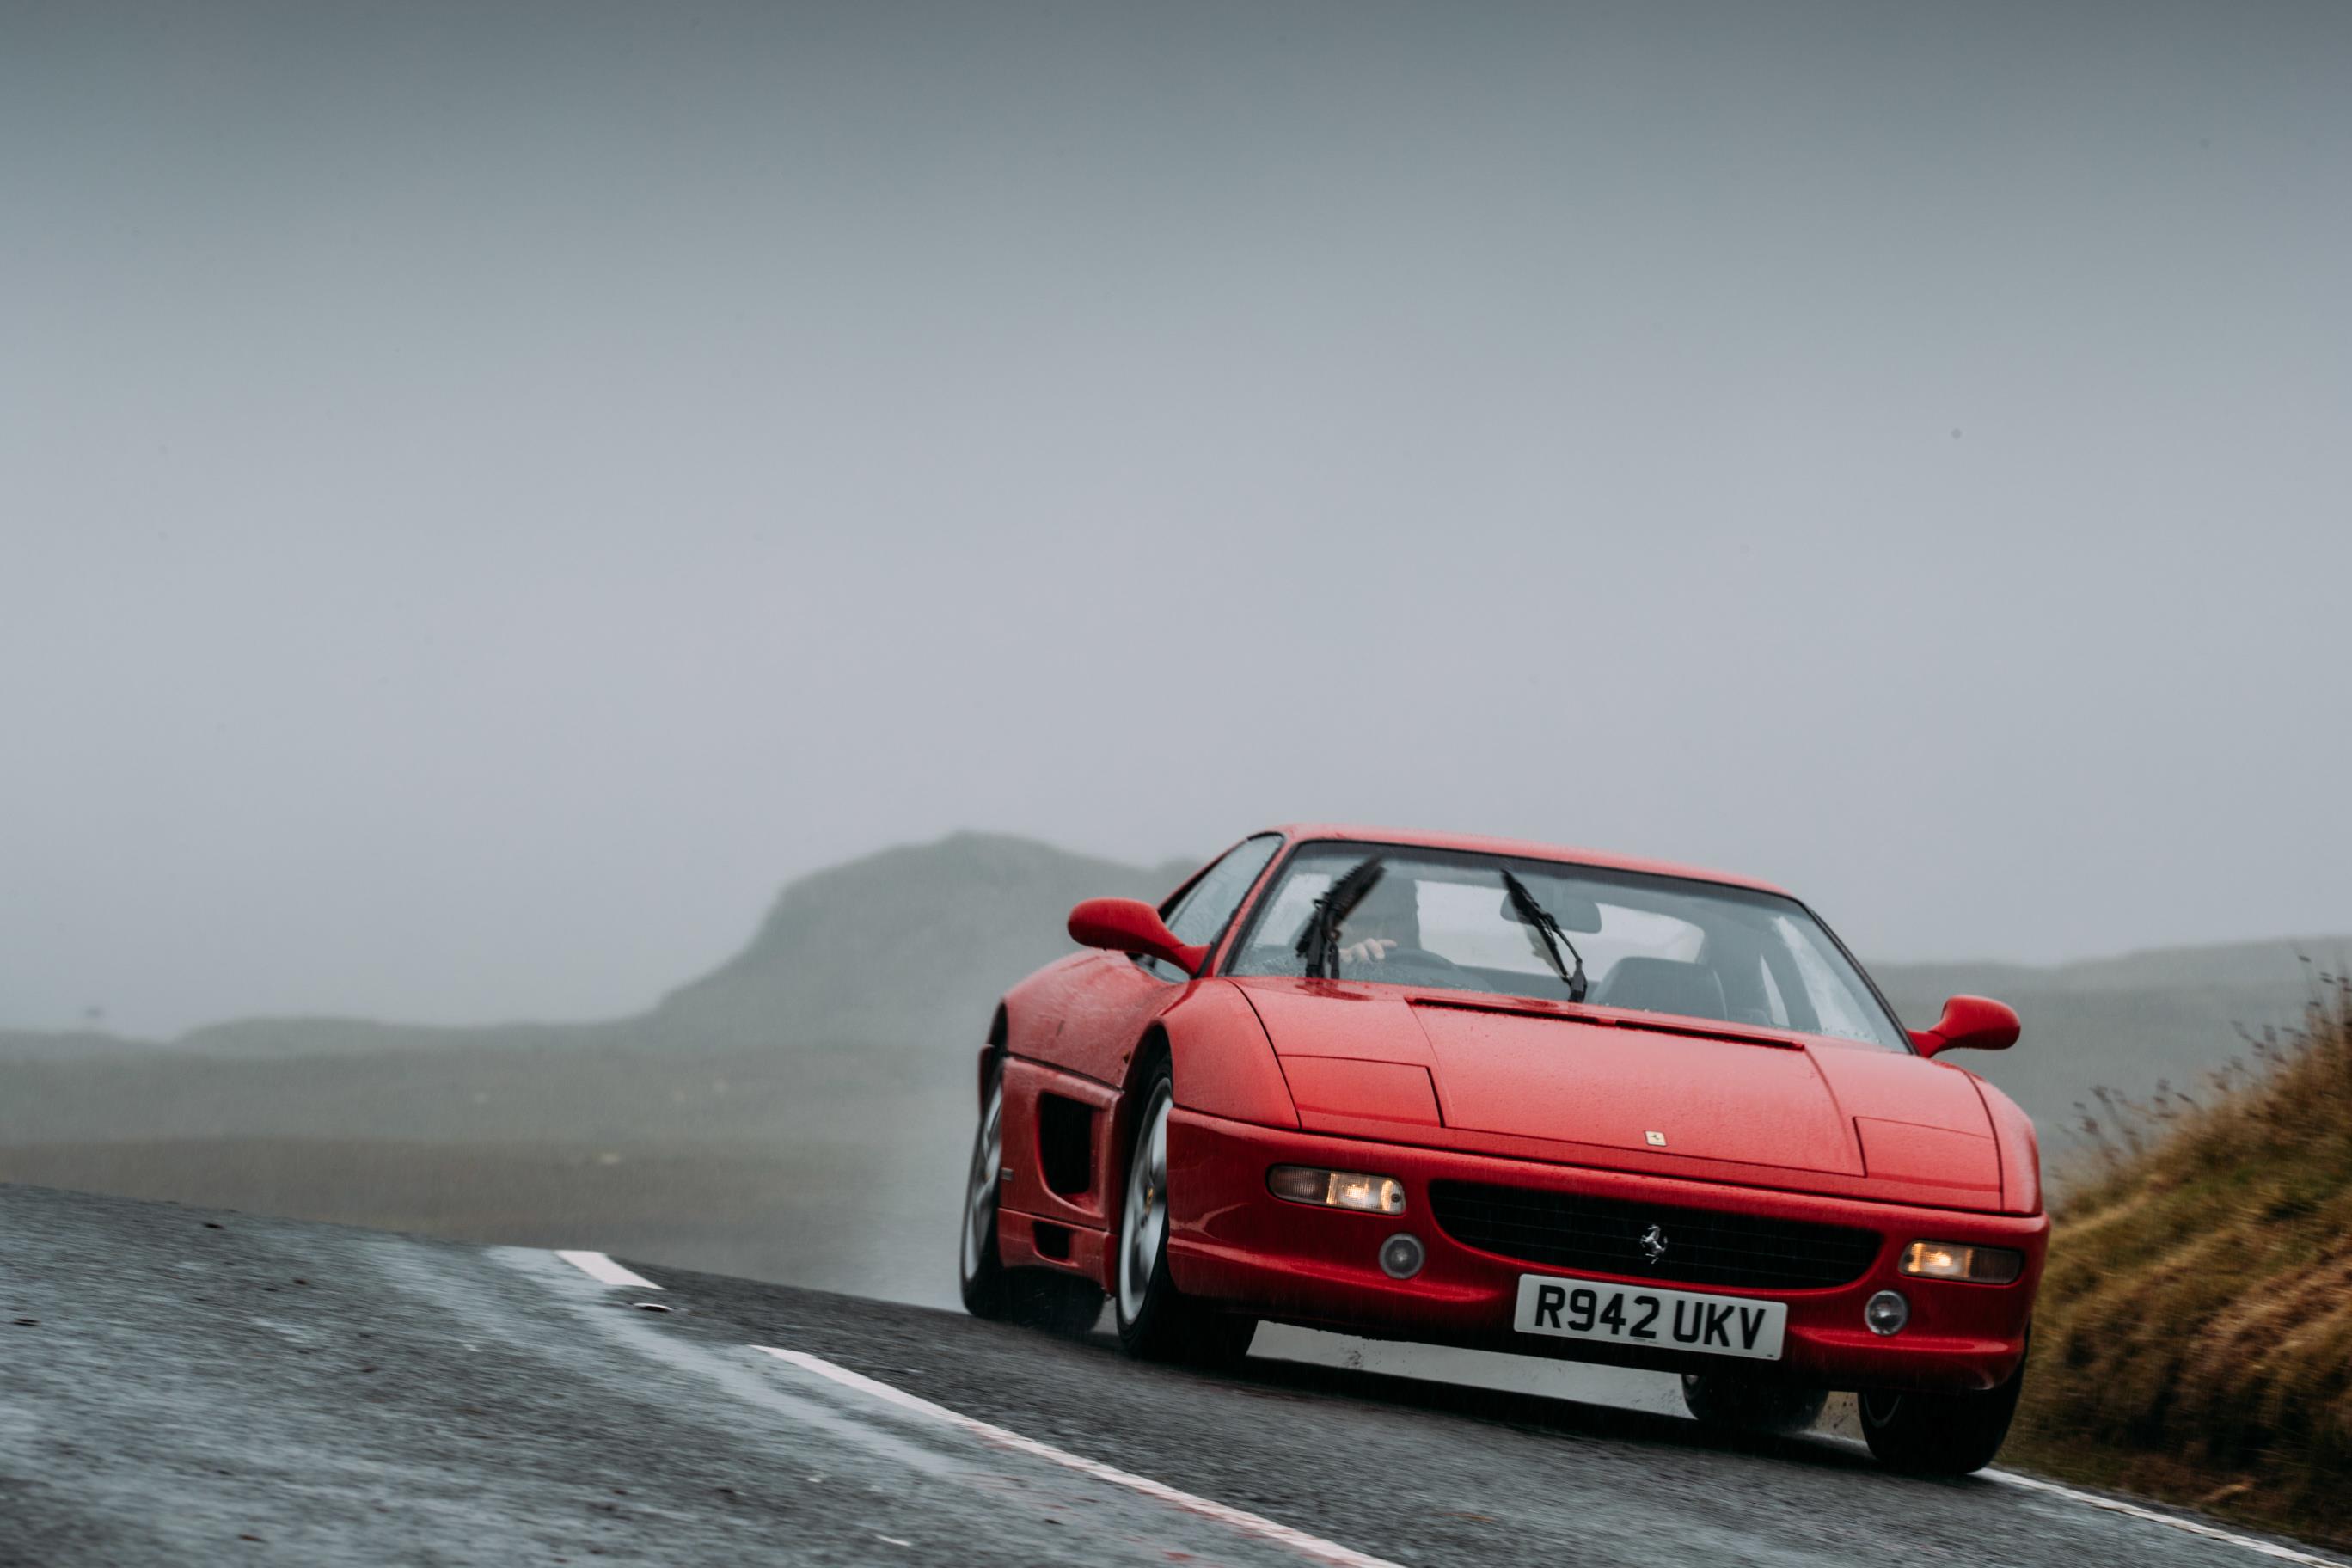 The F355 was the first in a new line of Ferrari models